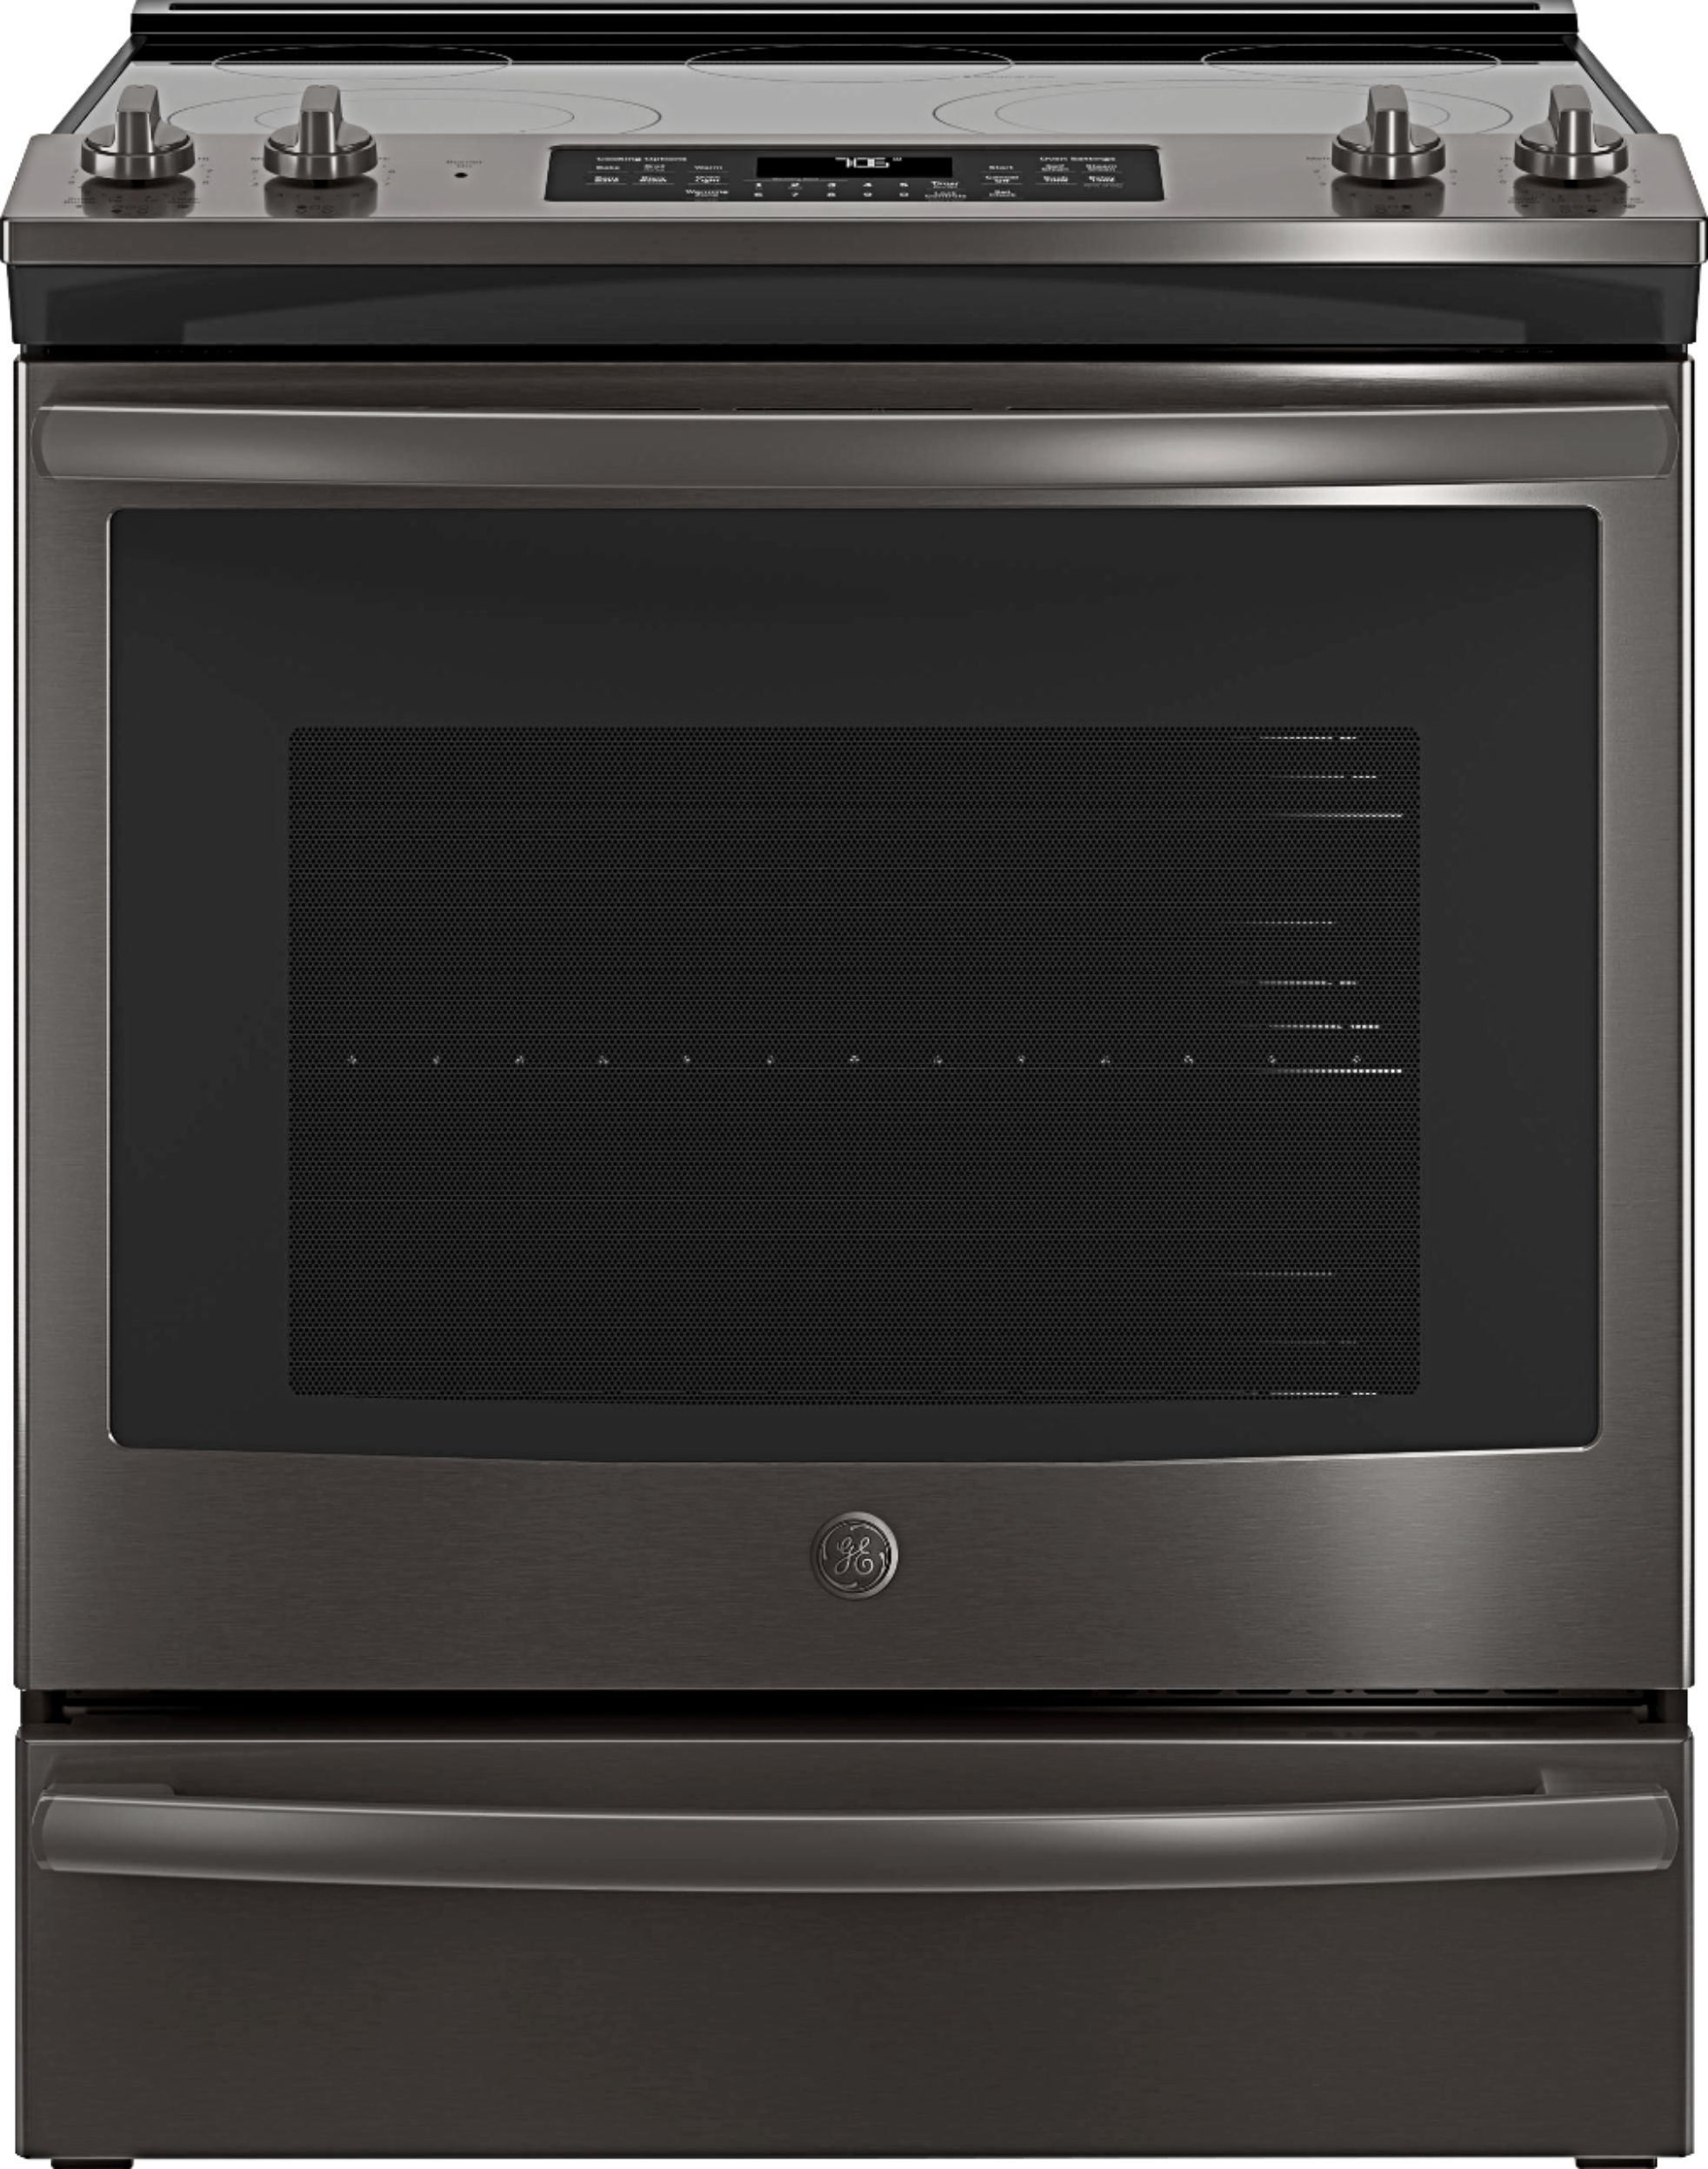 GE – 5.3 Cu. Ft. Slide-In Electric Convection Range – Black stainless steel